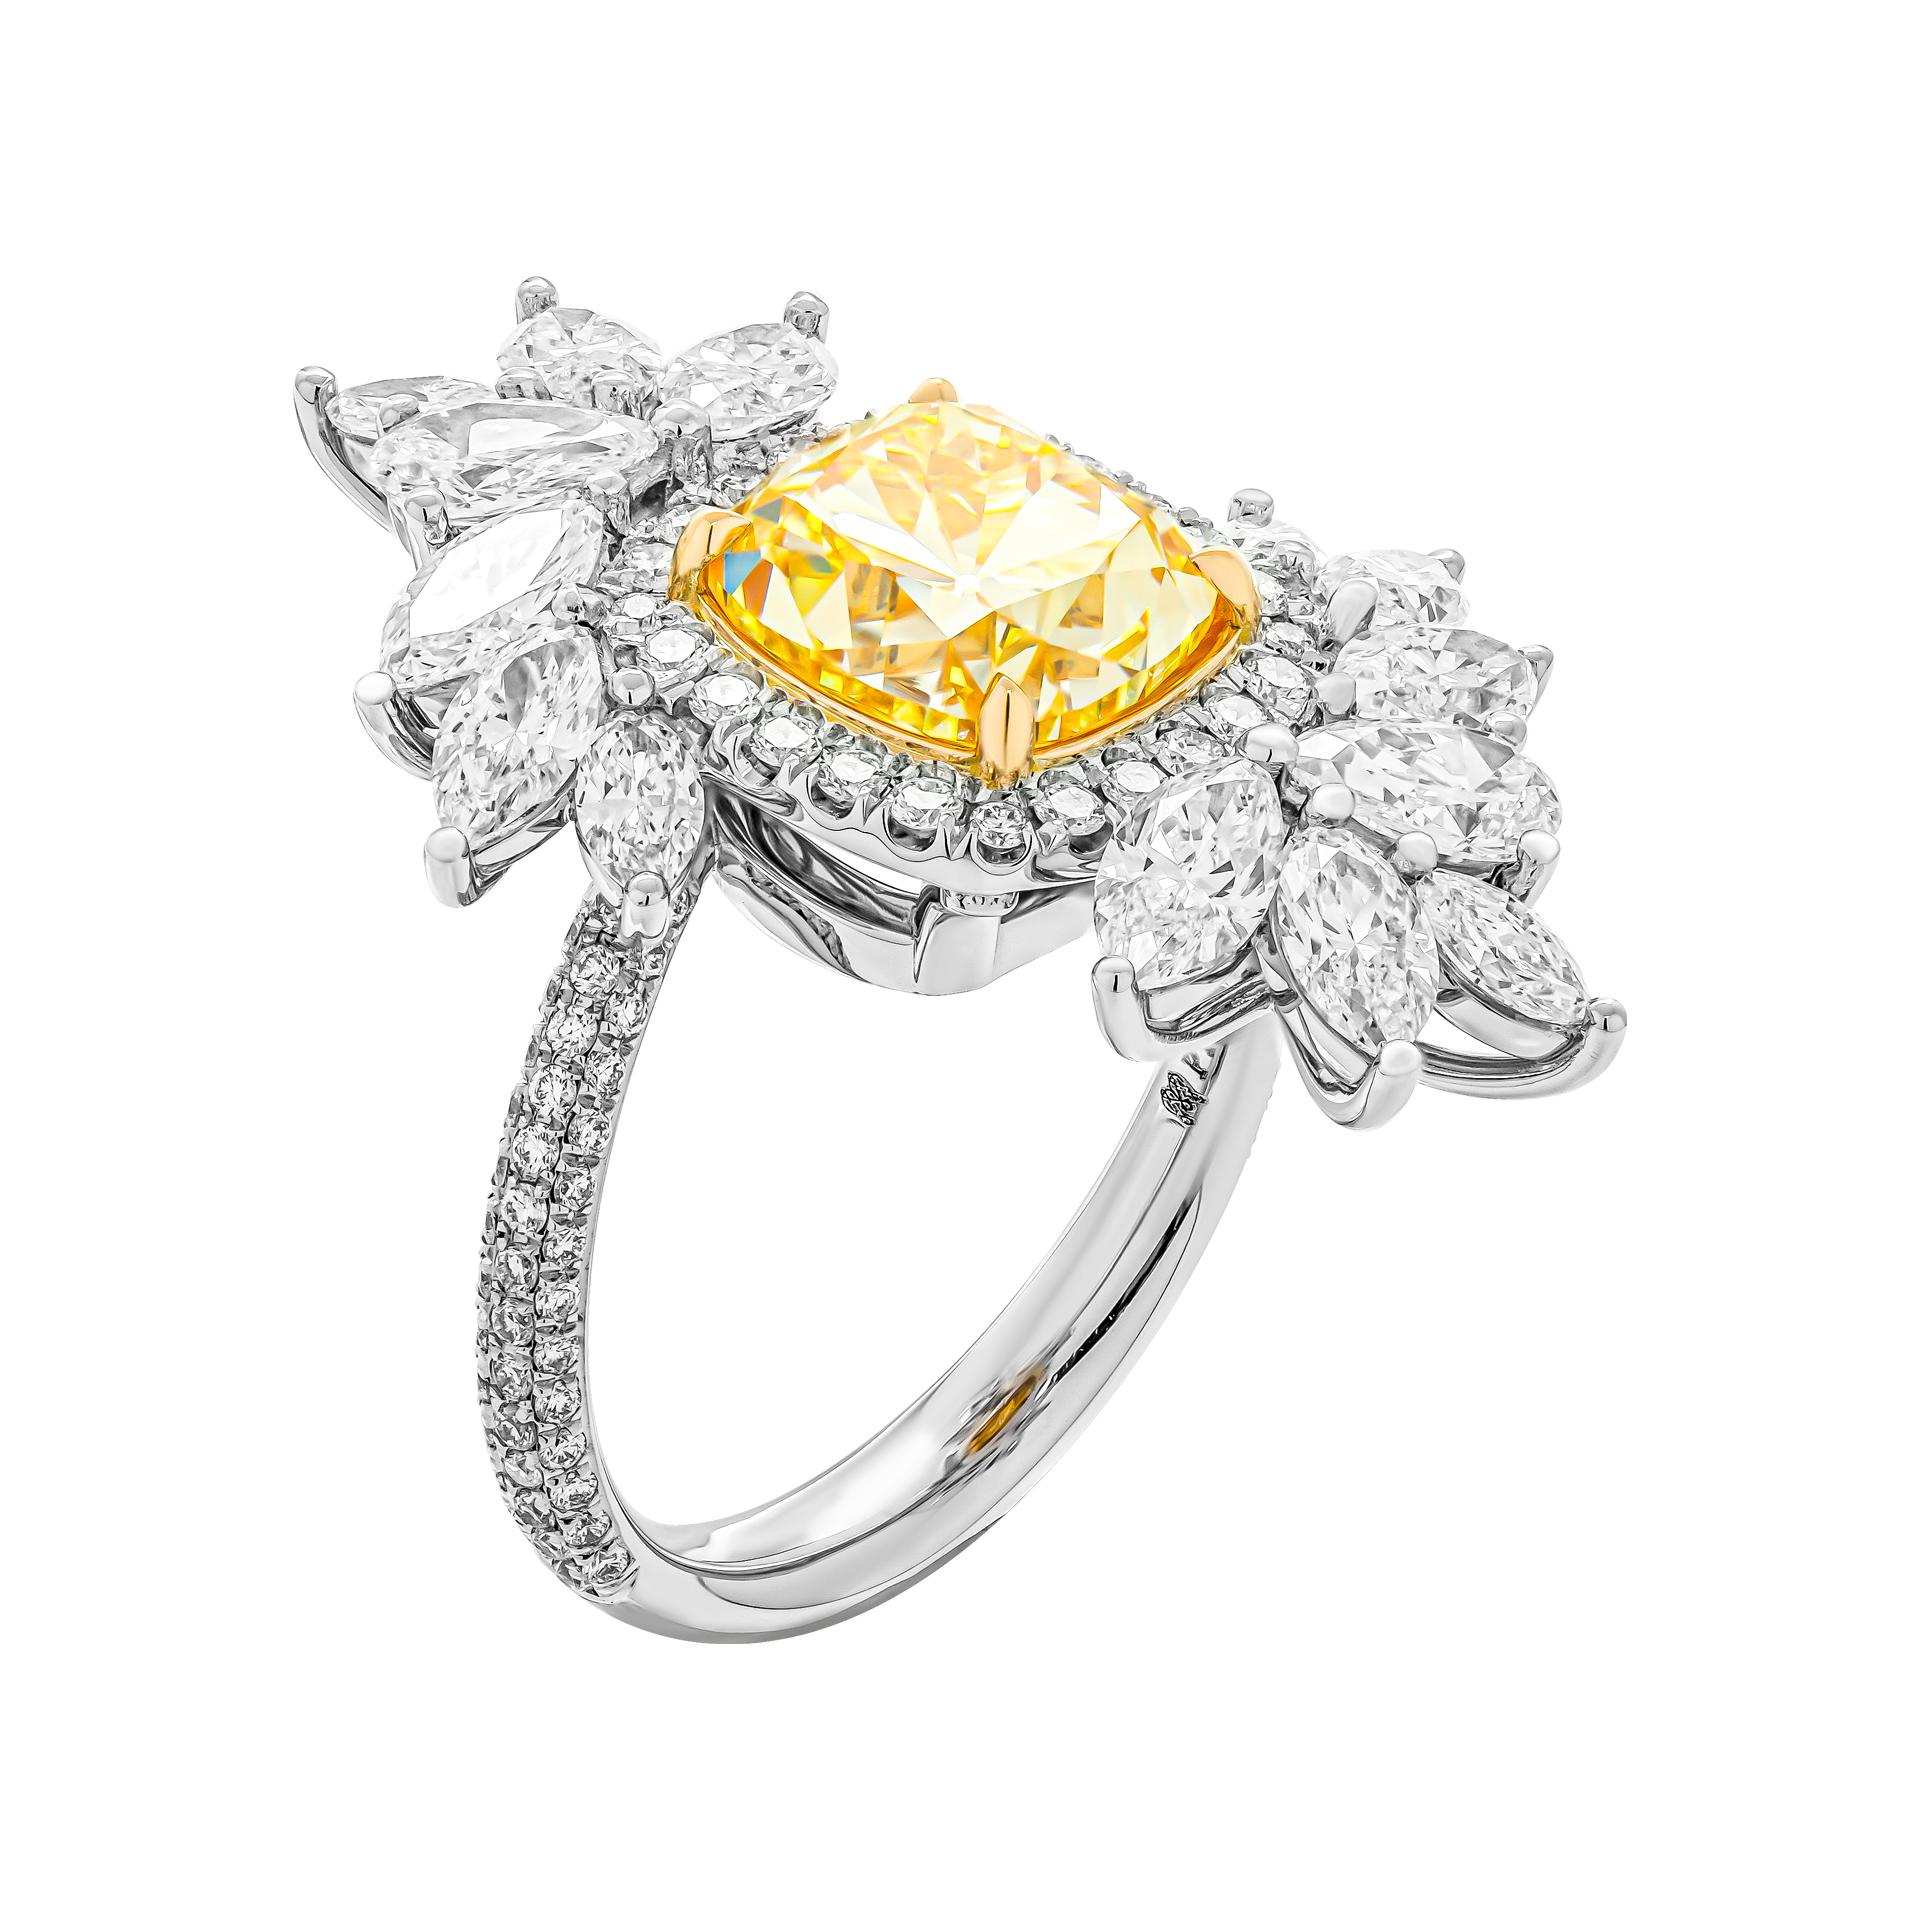 Contemporary GIA Certified 4.13ct Fancy Intense Yellow Vs1 Cushion Brilliant Cut Ring For Sale